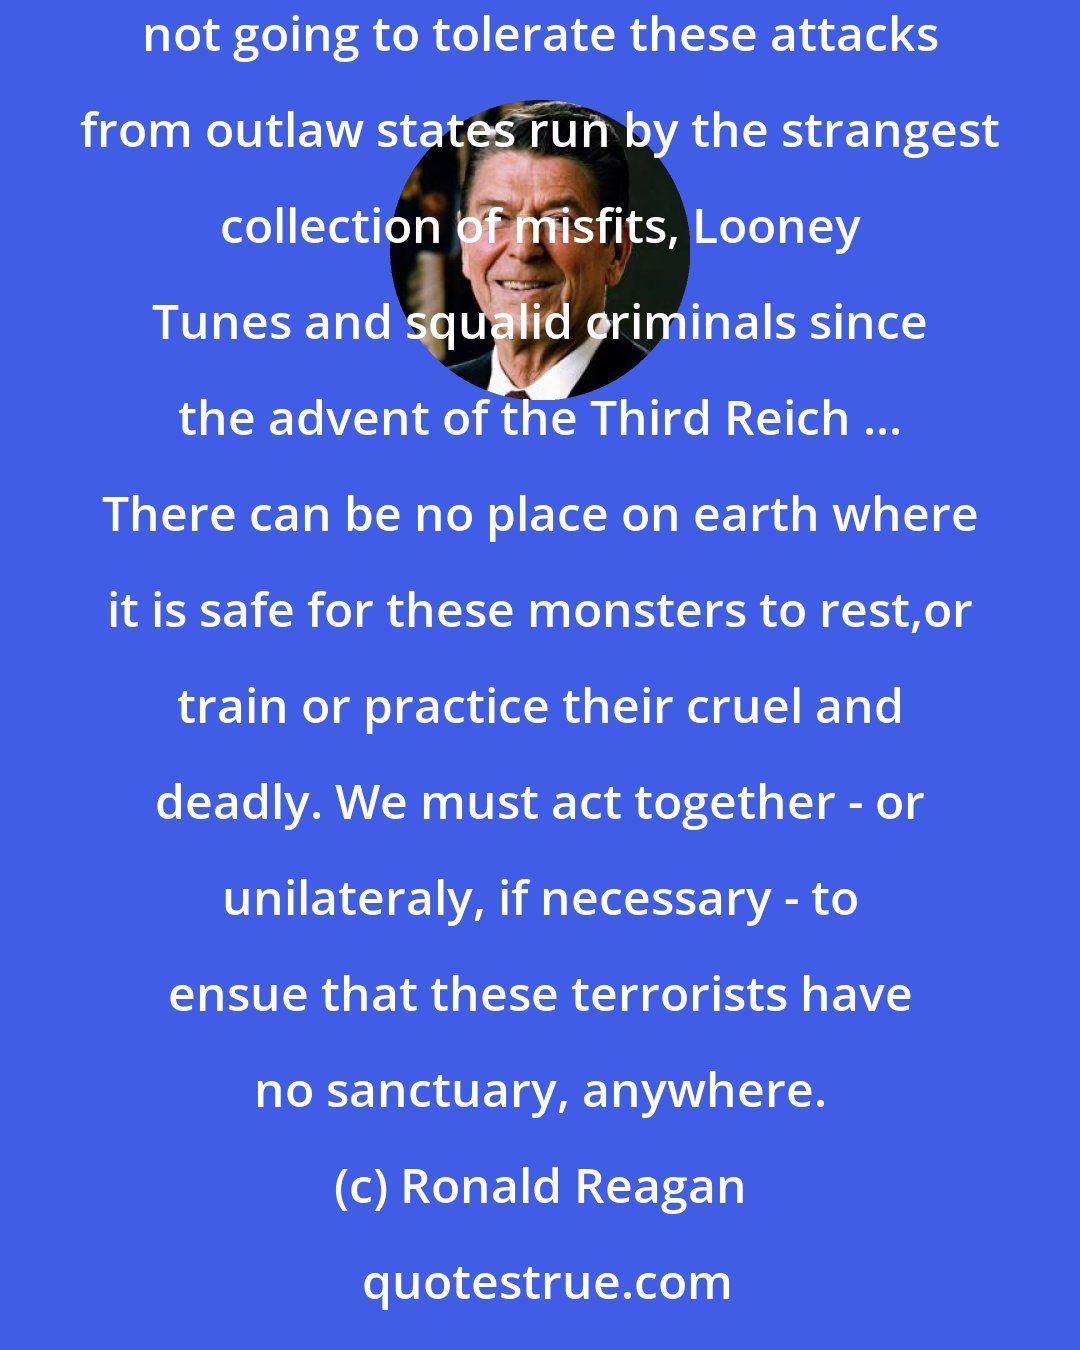 Ronald Reagan: Americans are not going to tolerate intimidation, terror and outright acts of war against this nation and its people. And we are especially not going to tolerate these attacks from outlaw states run by the strangest collection of misfits, Looney Tunes and squalid criminals since the advent of the Third Reich ... There can be no place on earth where it is safe for these monsters to rest,or train or practice their cruel and deadly. We must act together - or unilateraly, if necessary - to ensue that these terrorists have no sanctuary, anywhere.